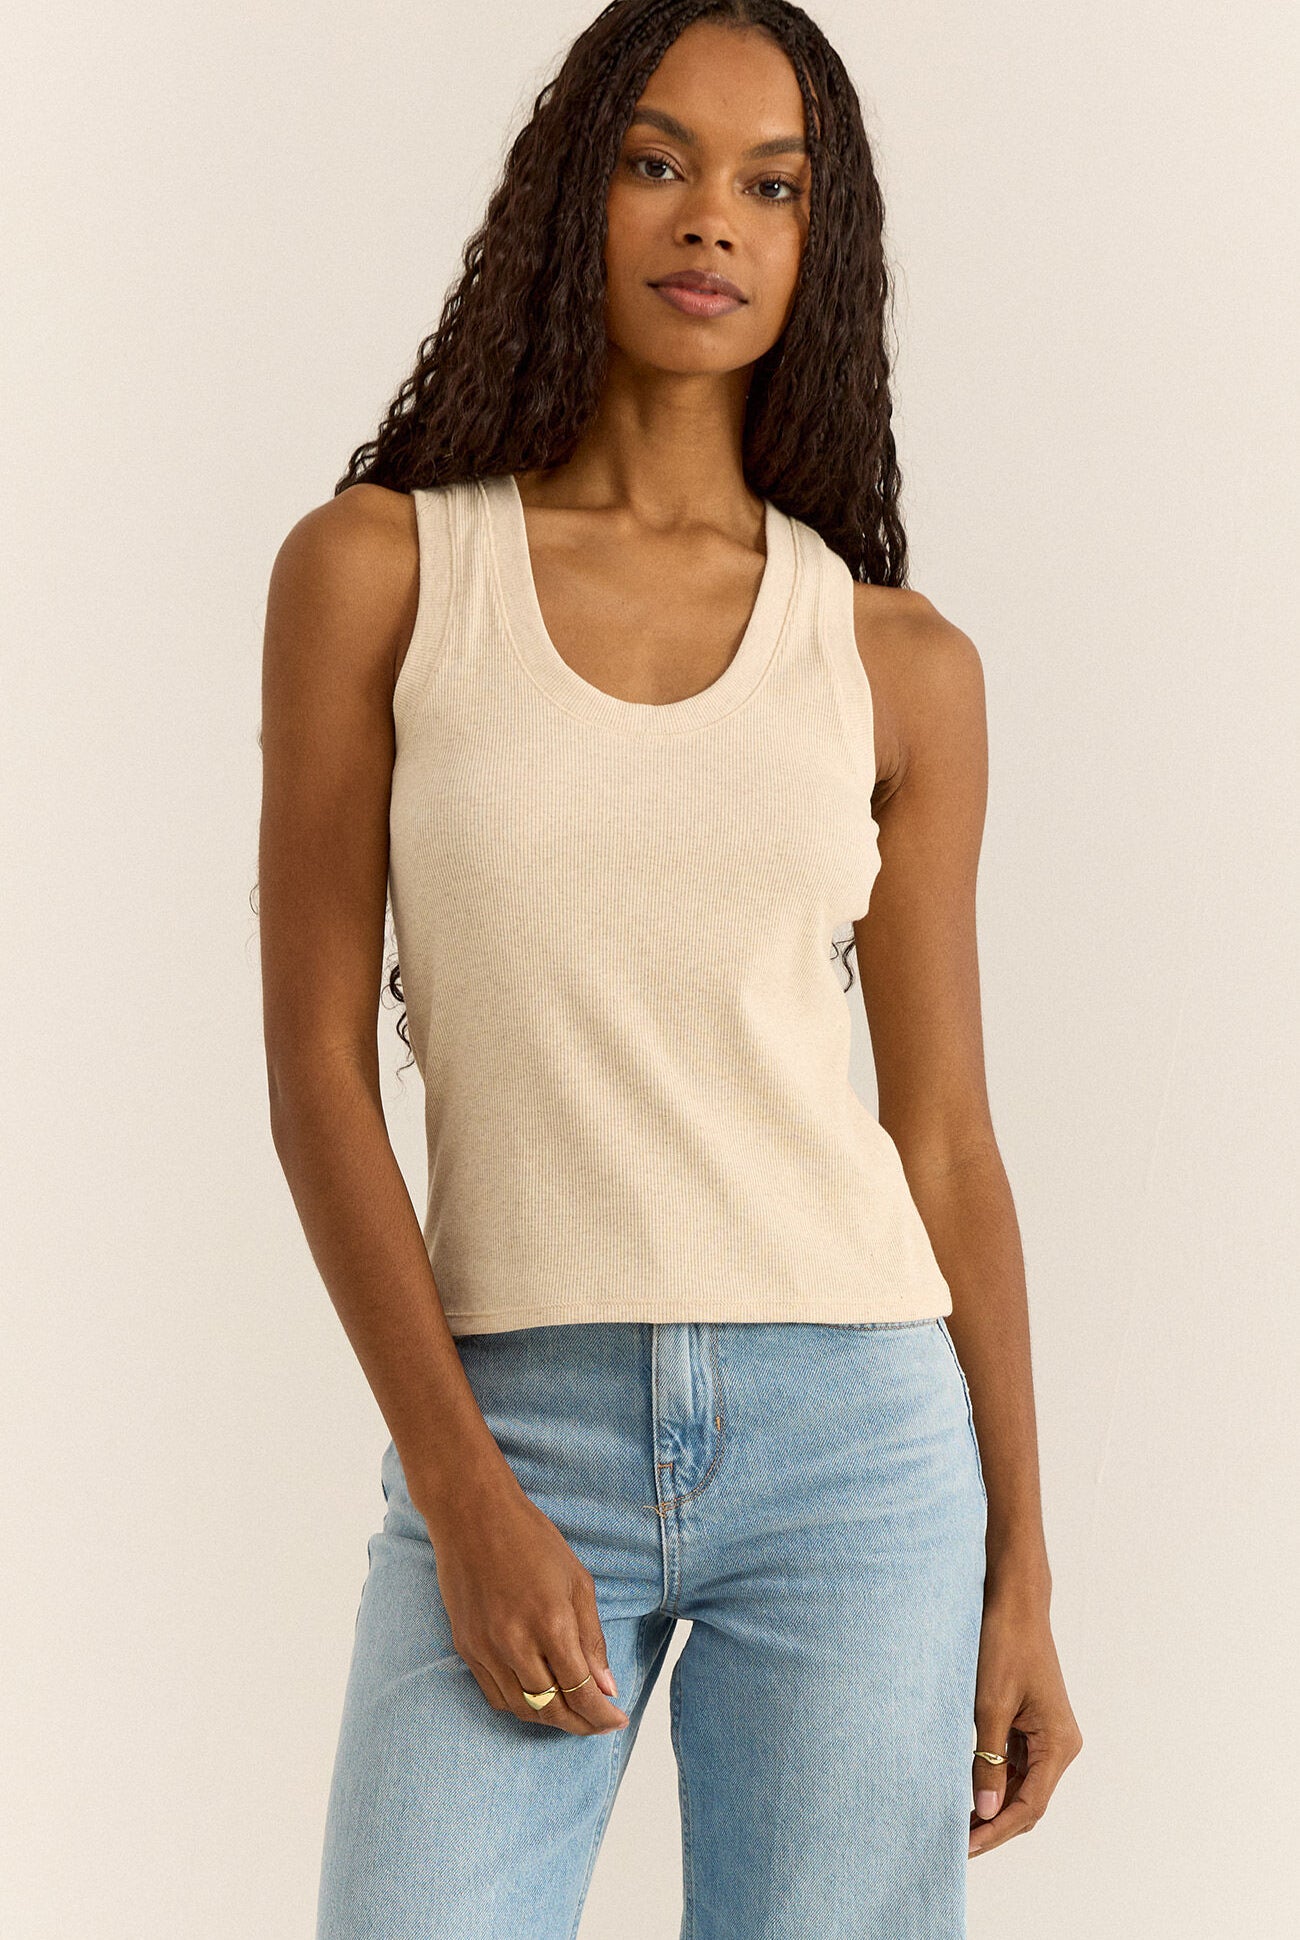 Sirena Rib Tank-Tank Tops-Vixen Collection, Day Spa and Women's Boutique Located in Seattle, Washington